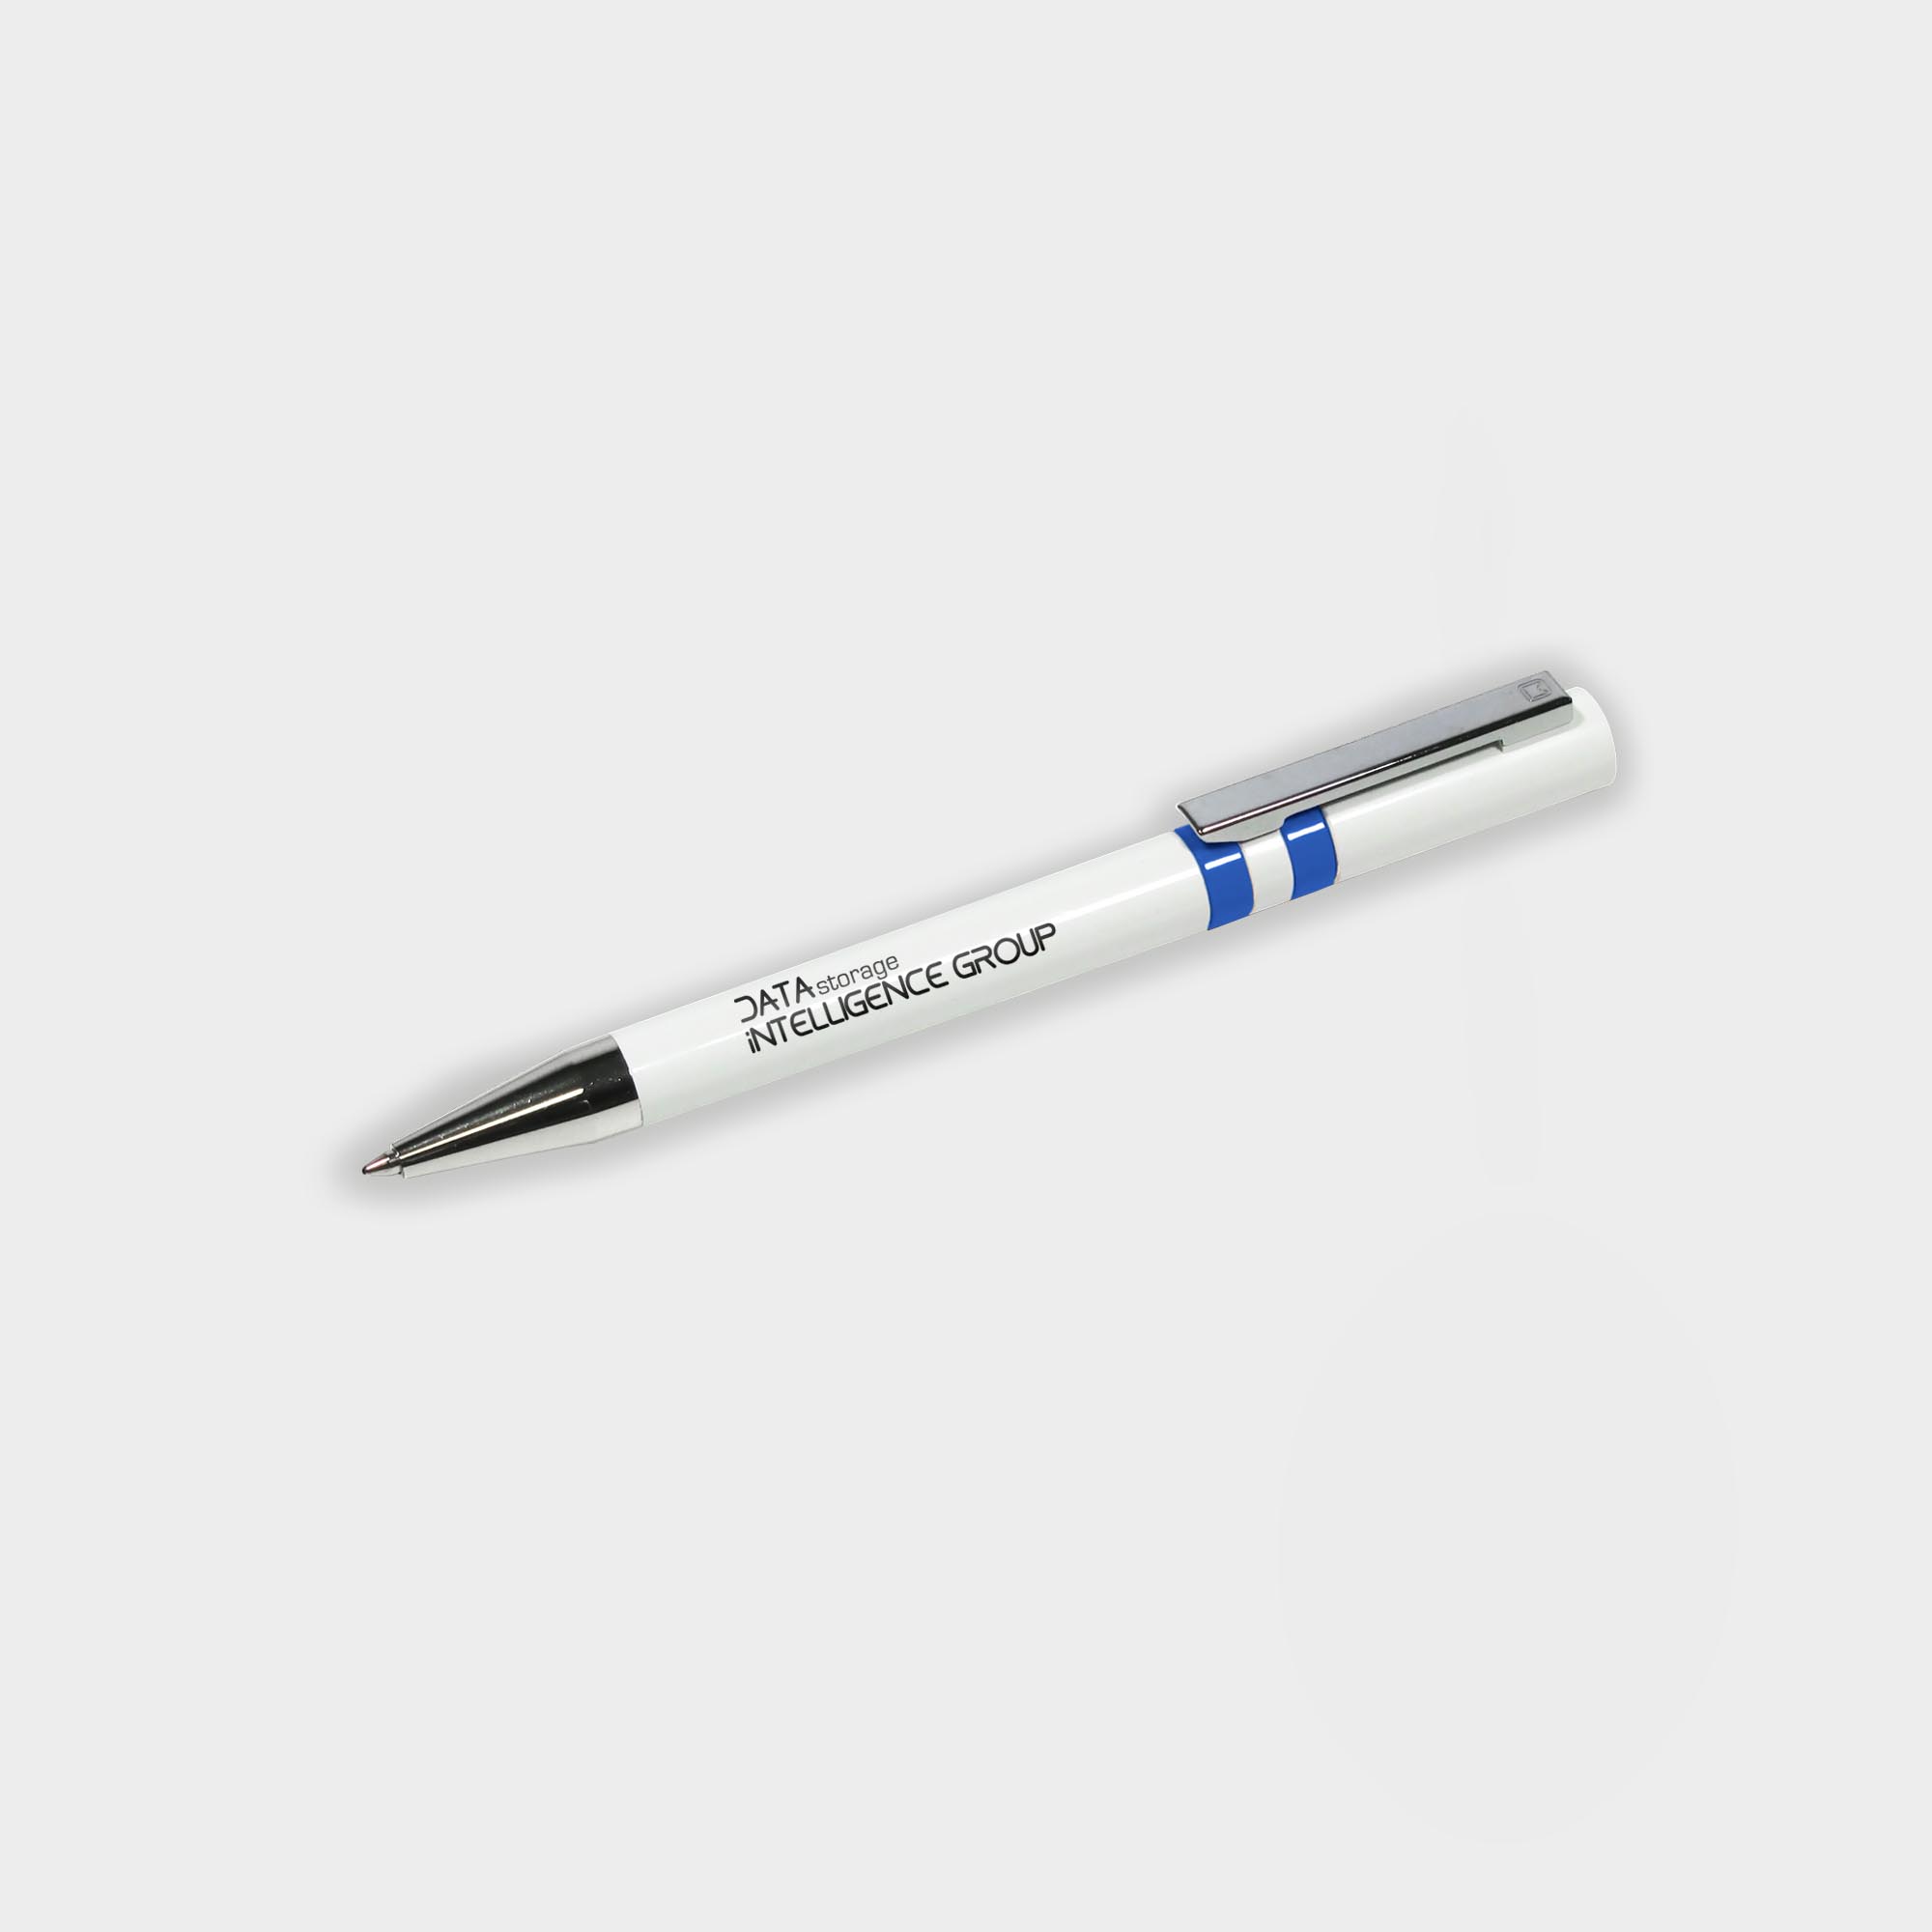 The Green & Good Ethic Pen made from recycled plastic. Stylish executive pen with chrome tip and various colour upon request. Black ink as standard. White / Blue